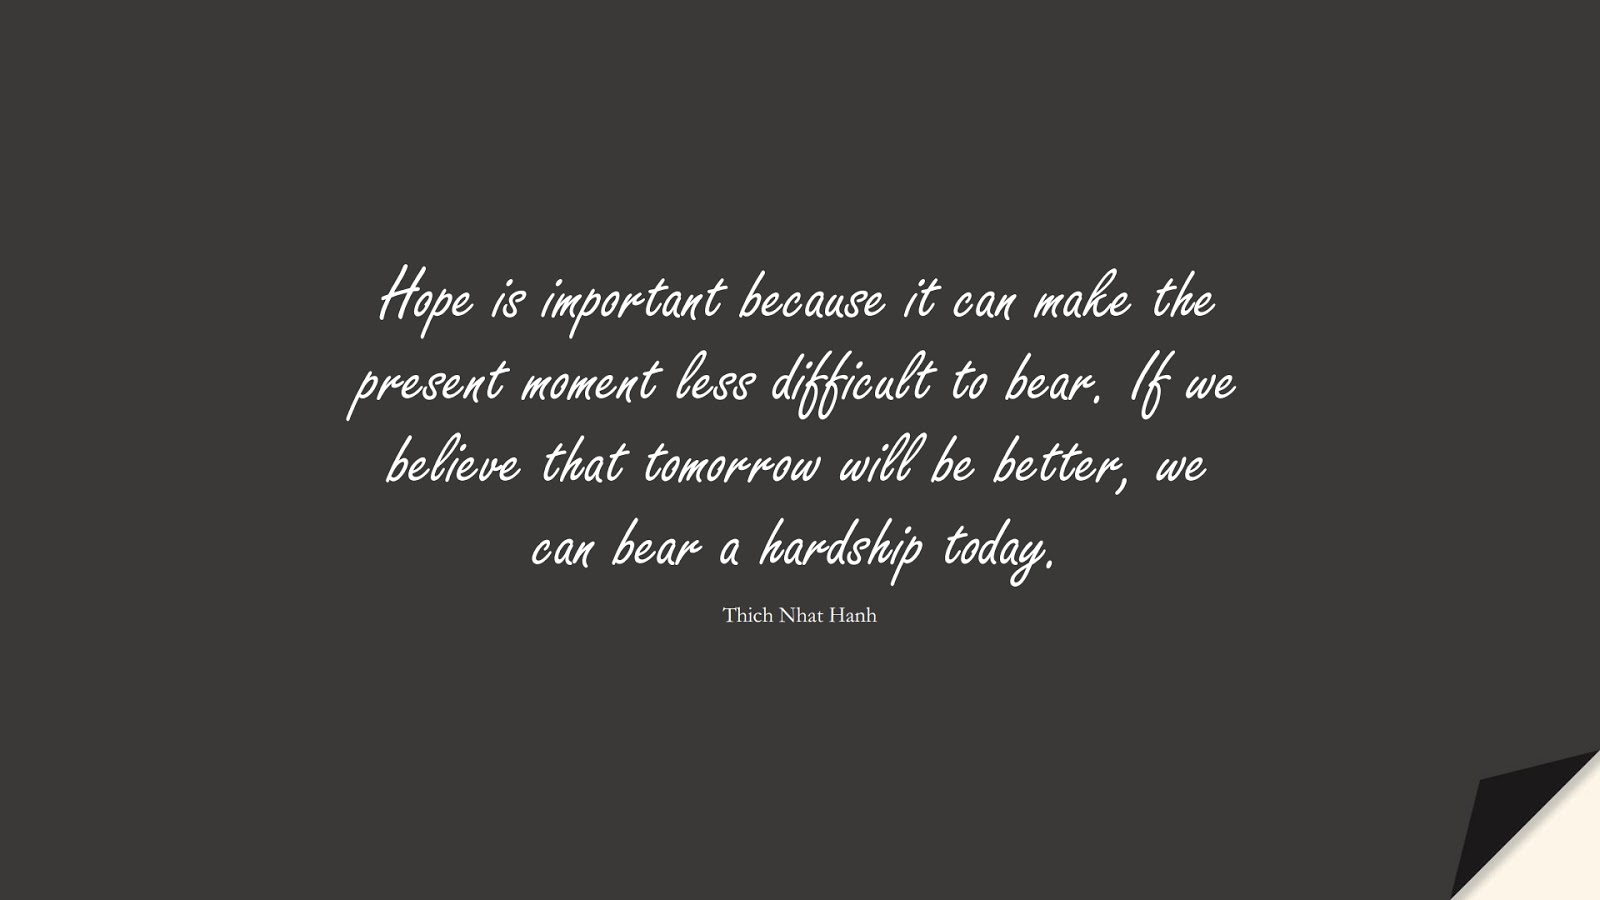 Hope is important because it can make the present moment less difficult to bear. If we believe that tomorrow will be better, we can bear a hardship today. (Thich Nhat Hanh);  #PositiveQuotes